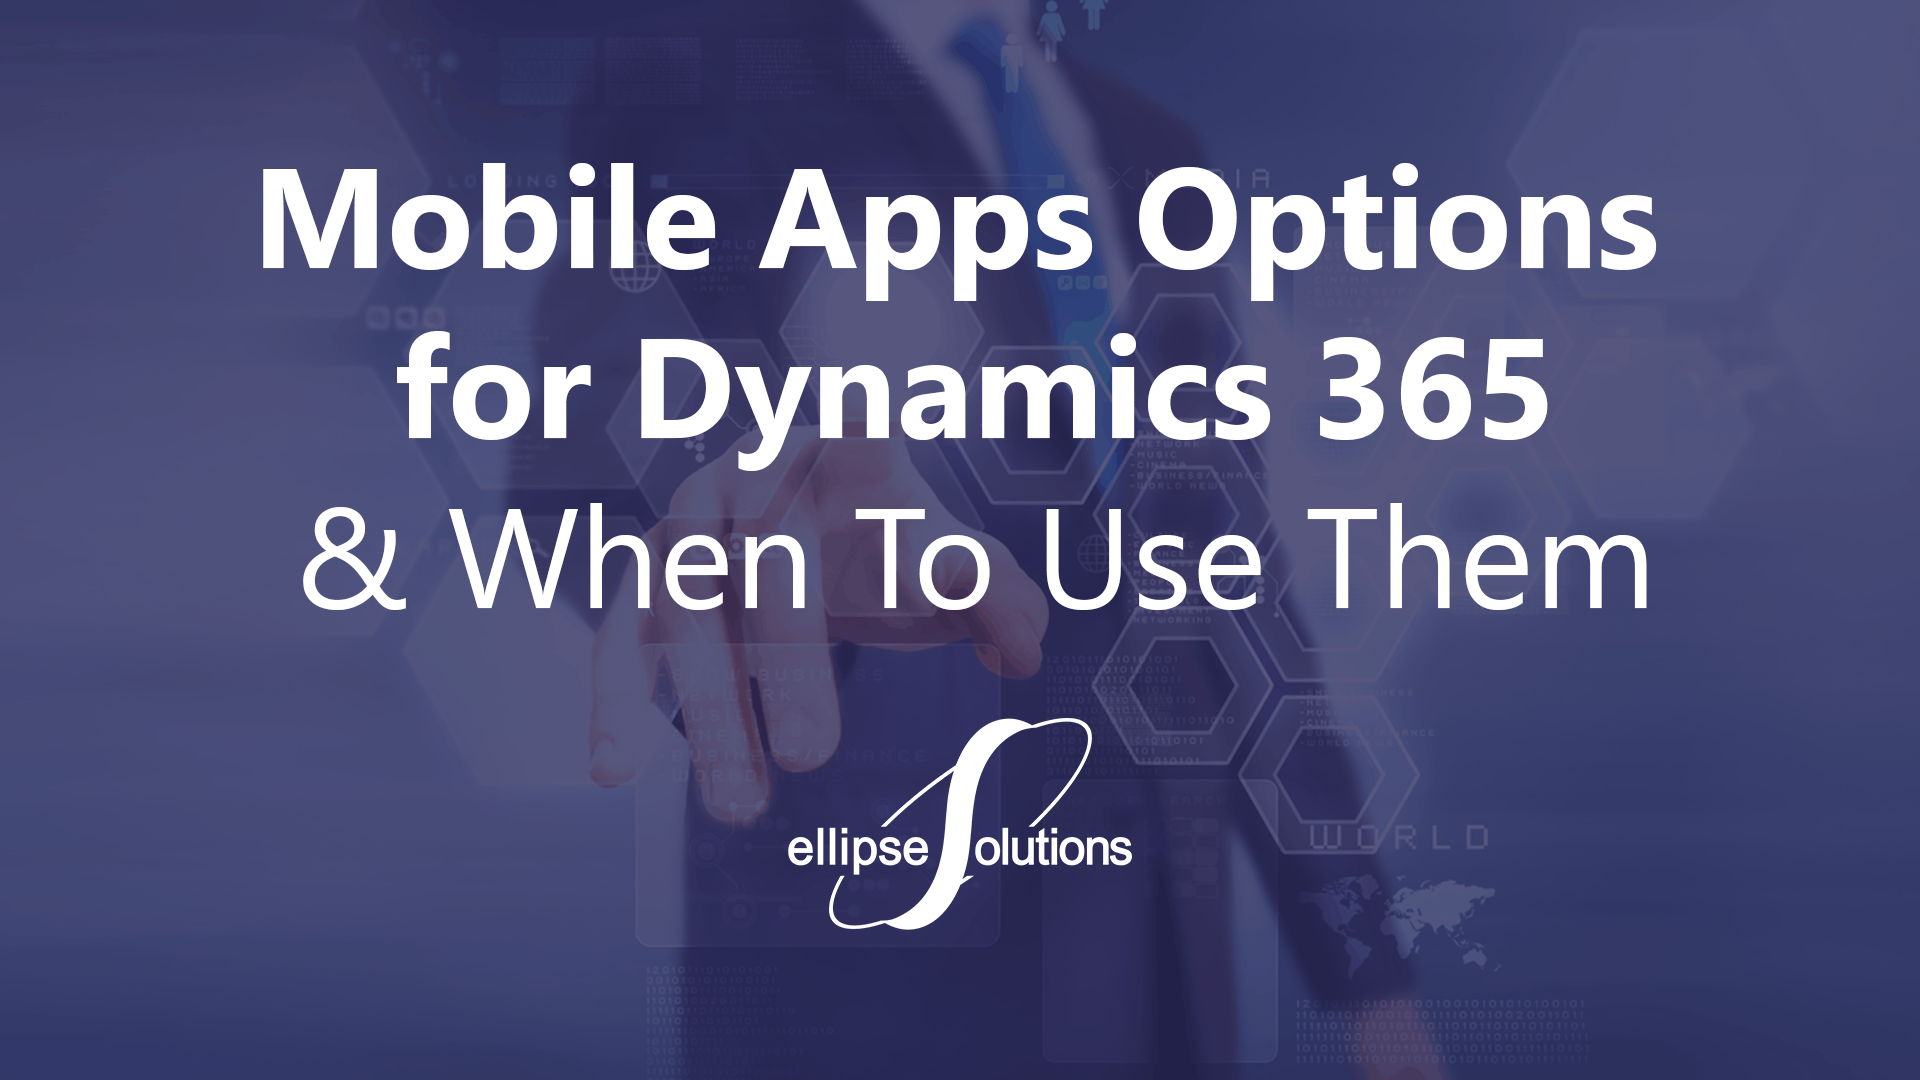 Mobile Apps Options for Dynamics 365